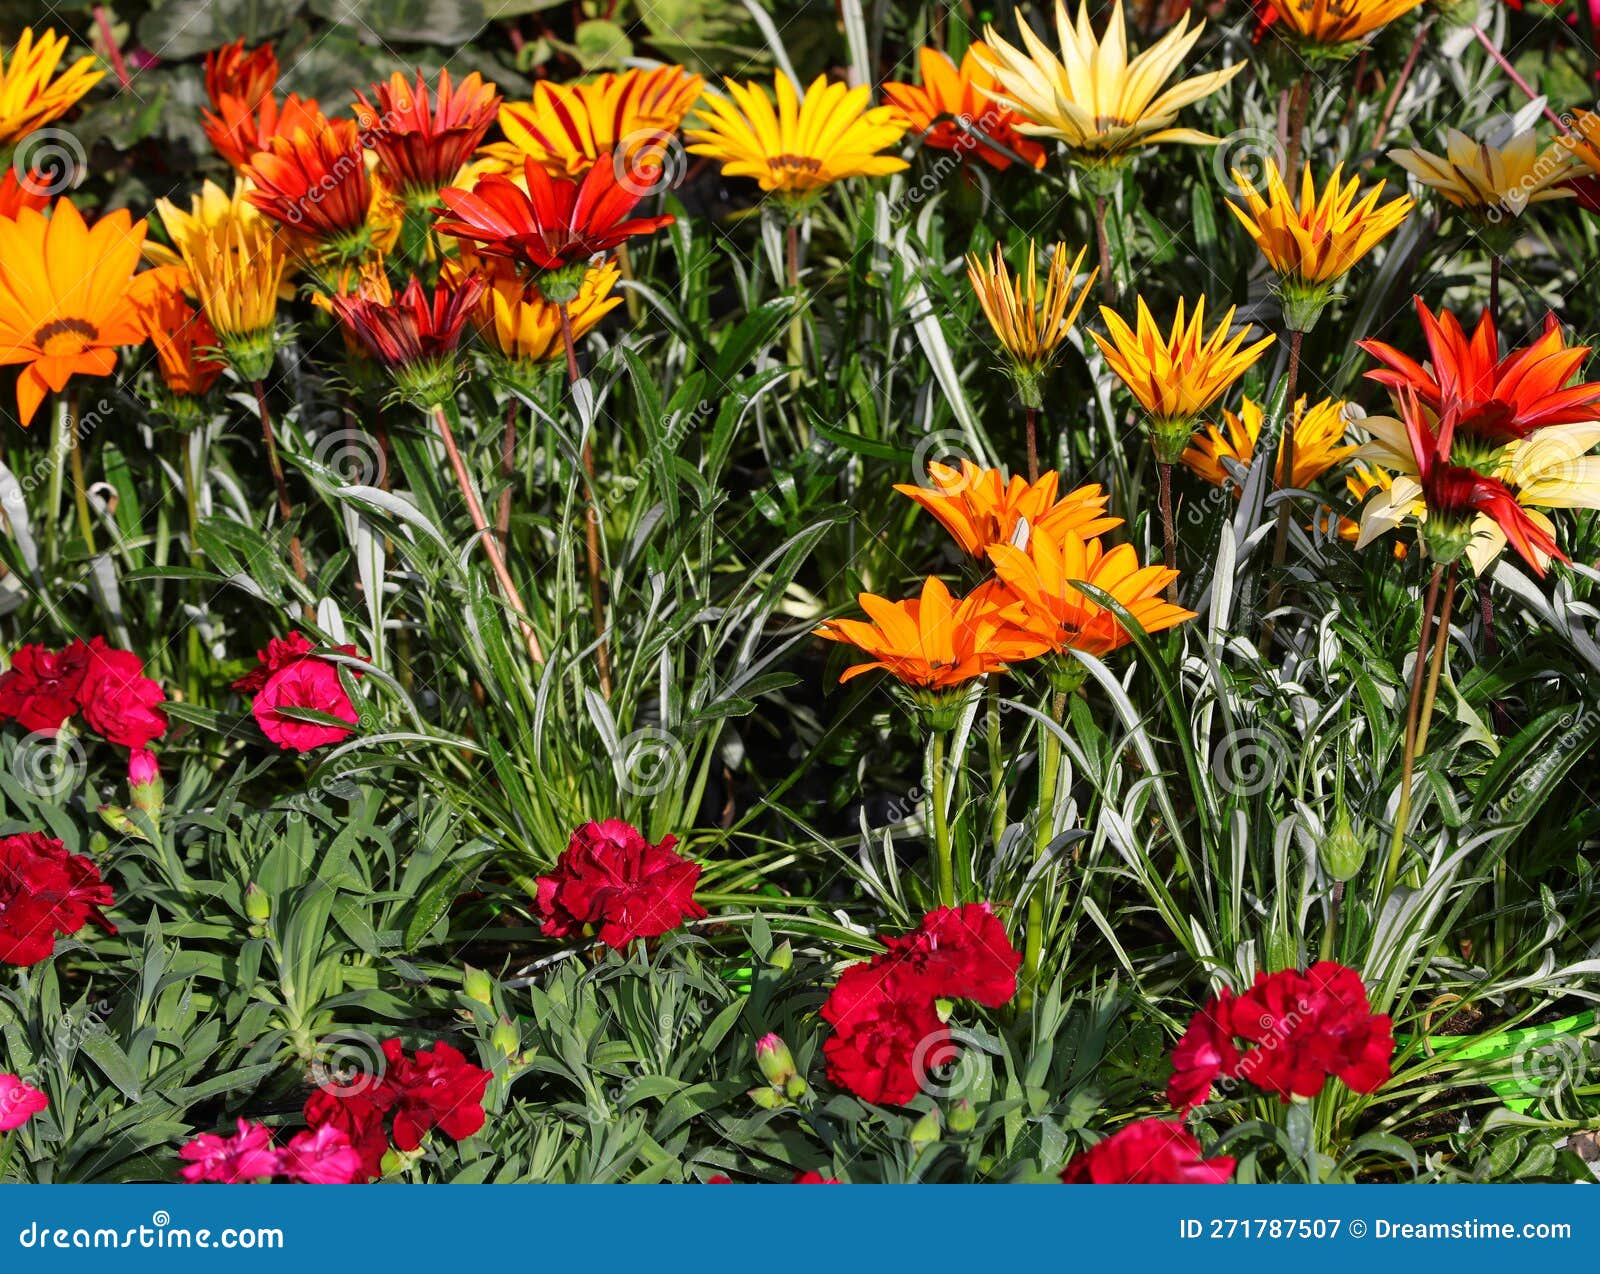 gazania flowers and more plants for sale at market